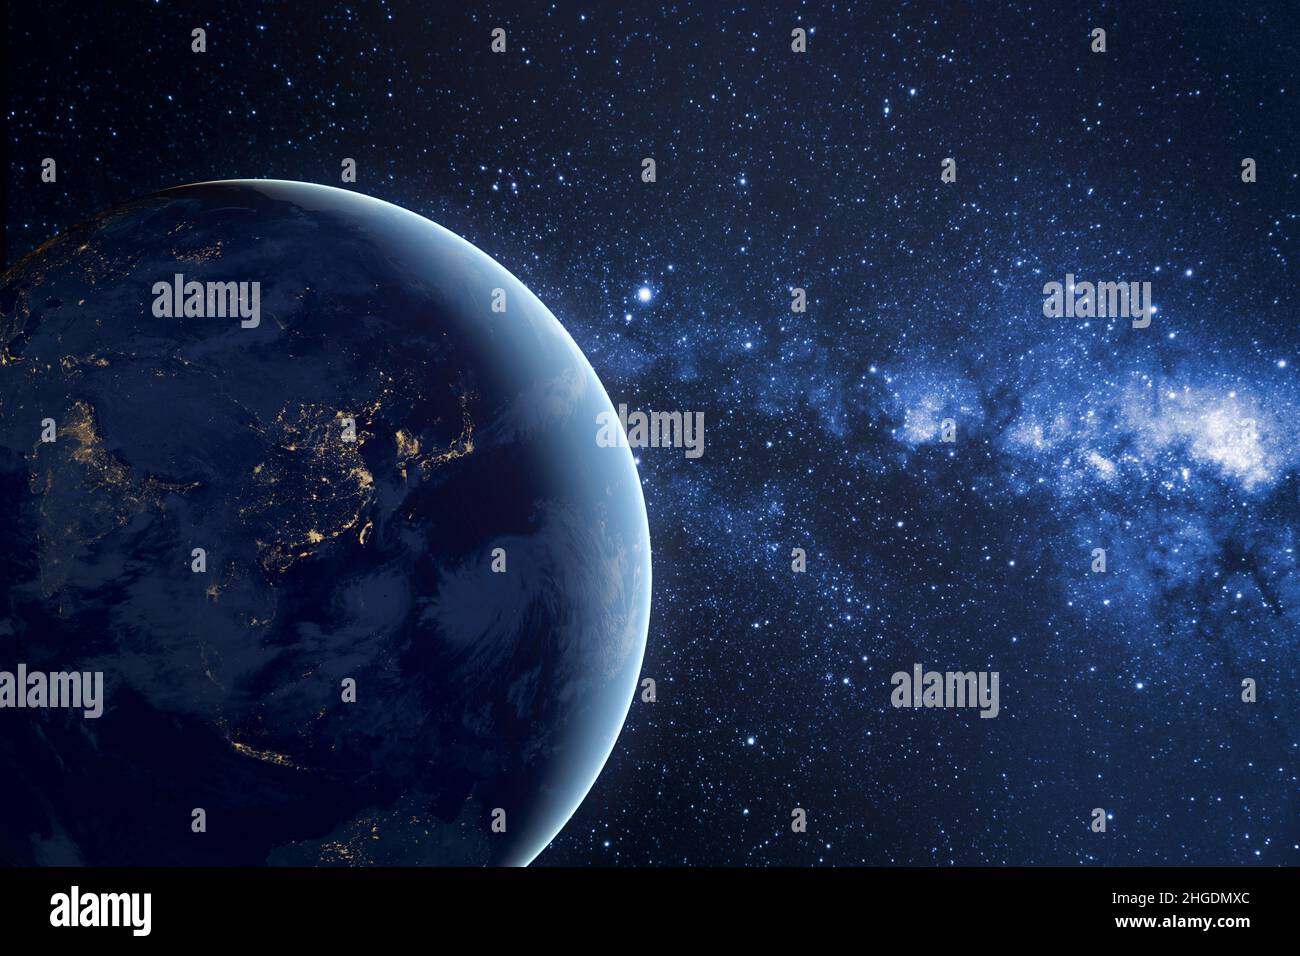 Planet earth planet in deep space against blue nebula. Night view from the orbit of the planet with cities lights. Outer space dark wallpaper with Eat Stock Photo